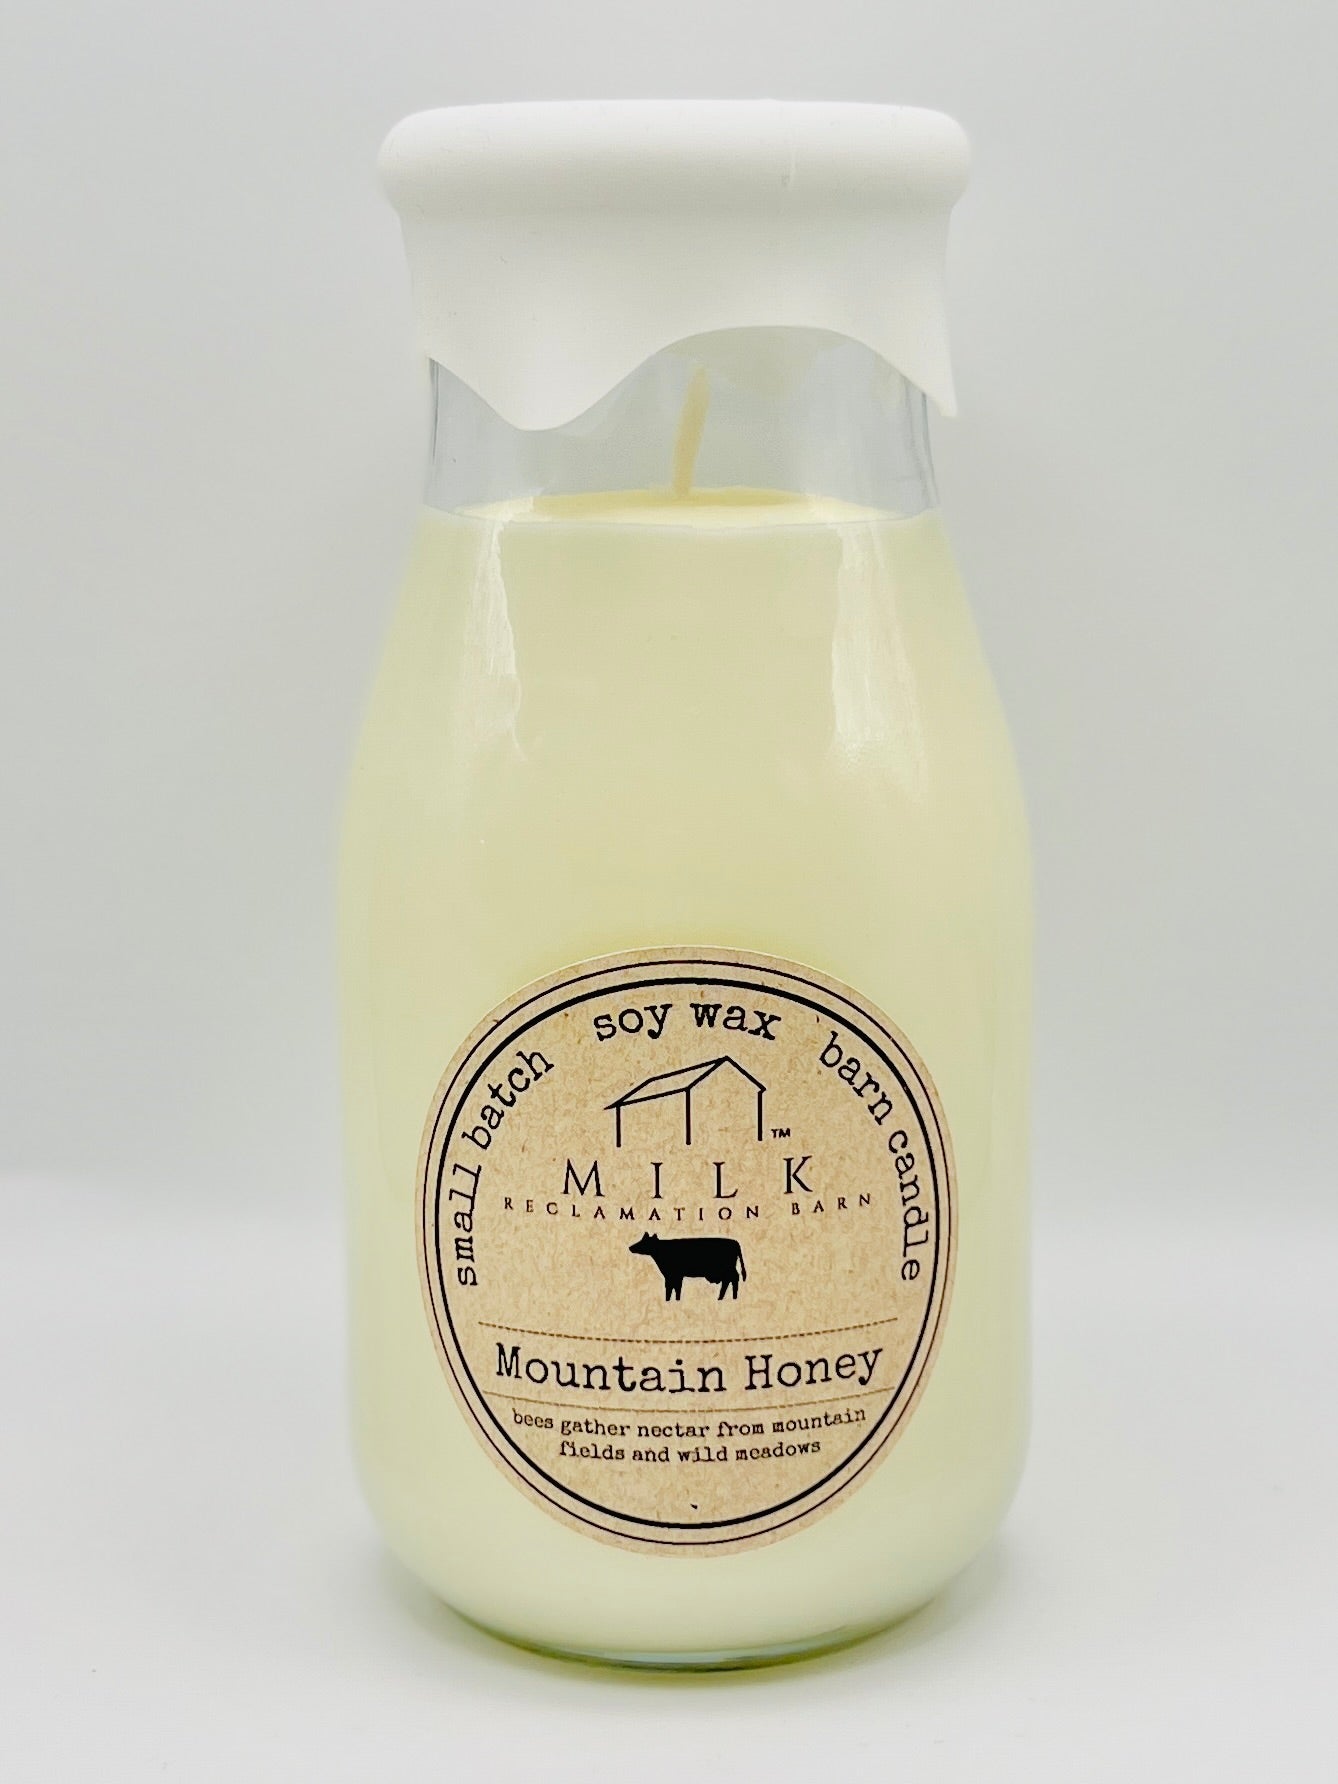 Candles by Milk Reclamation Barn